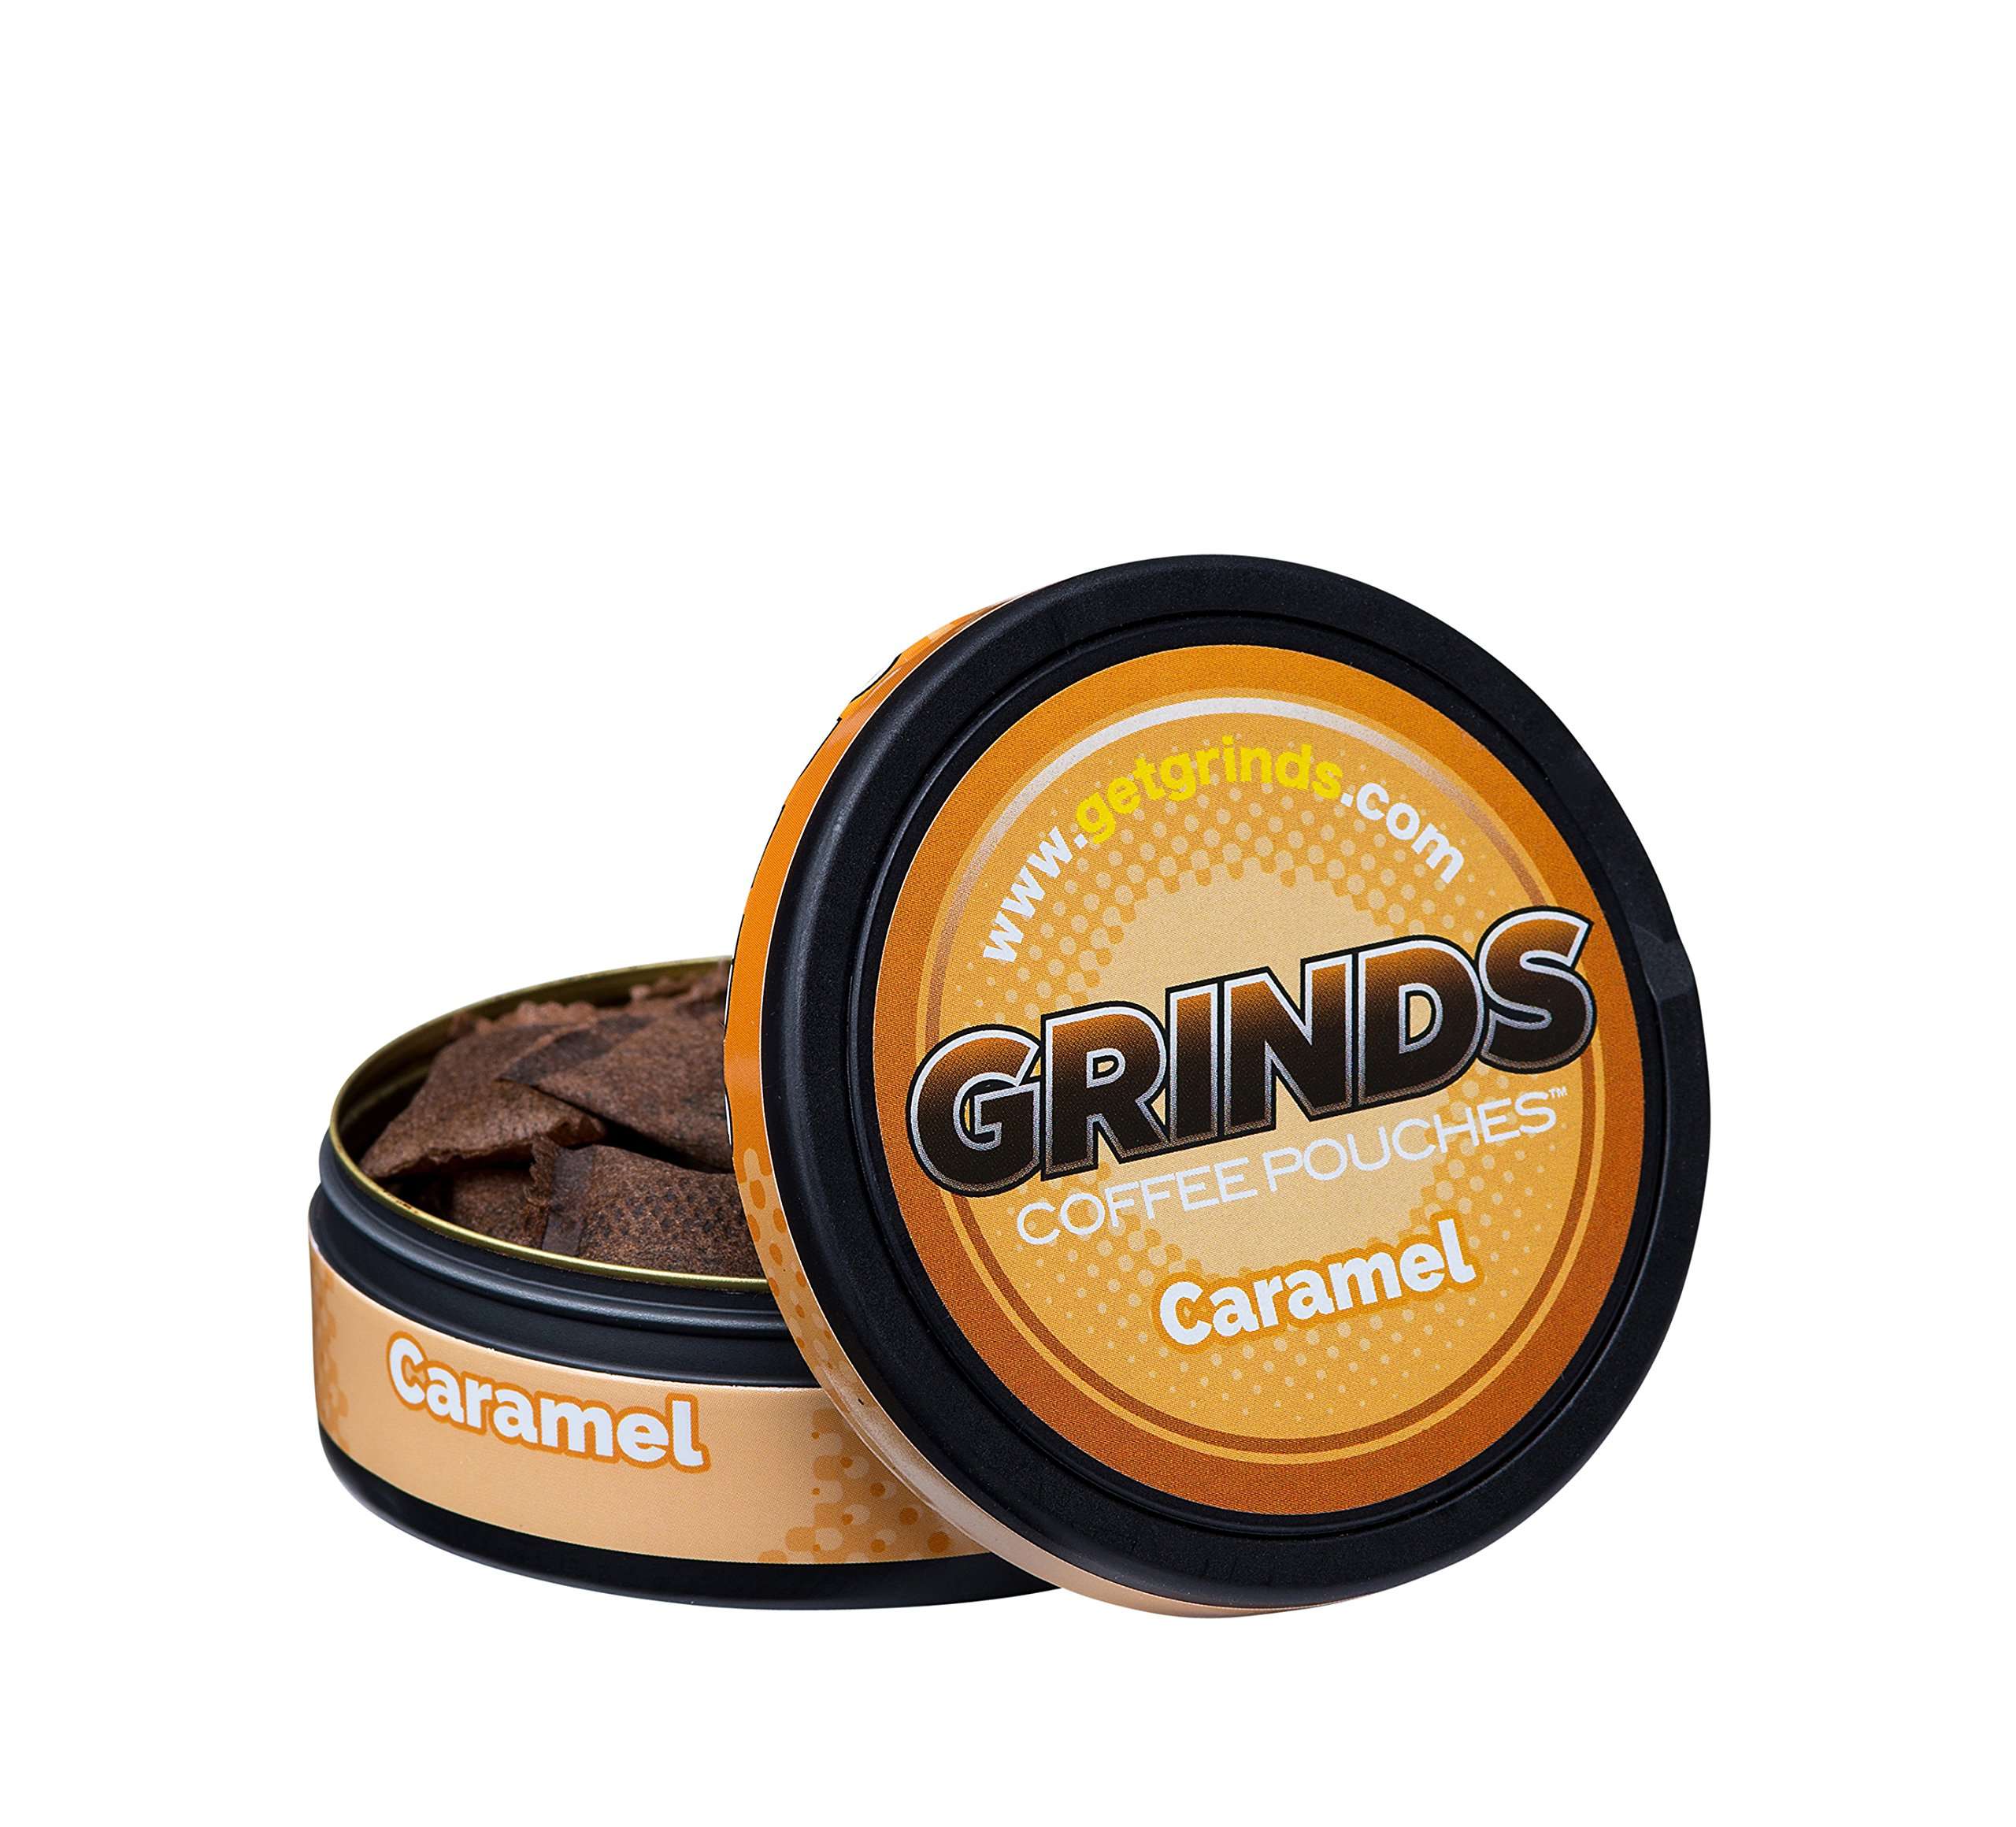 Amazon.com : Grinds Coffee Pouches